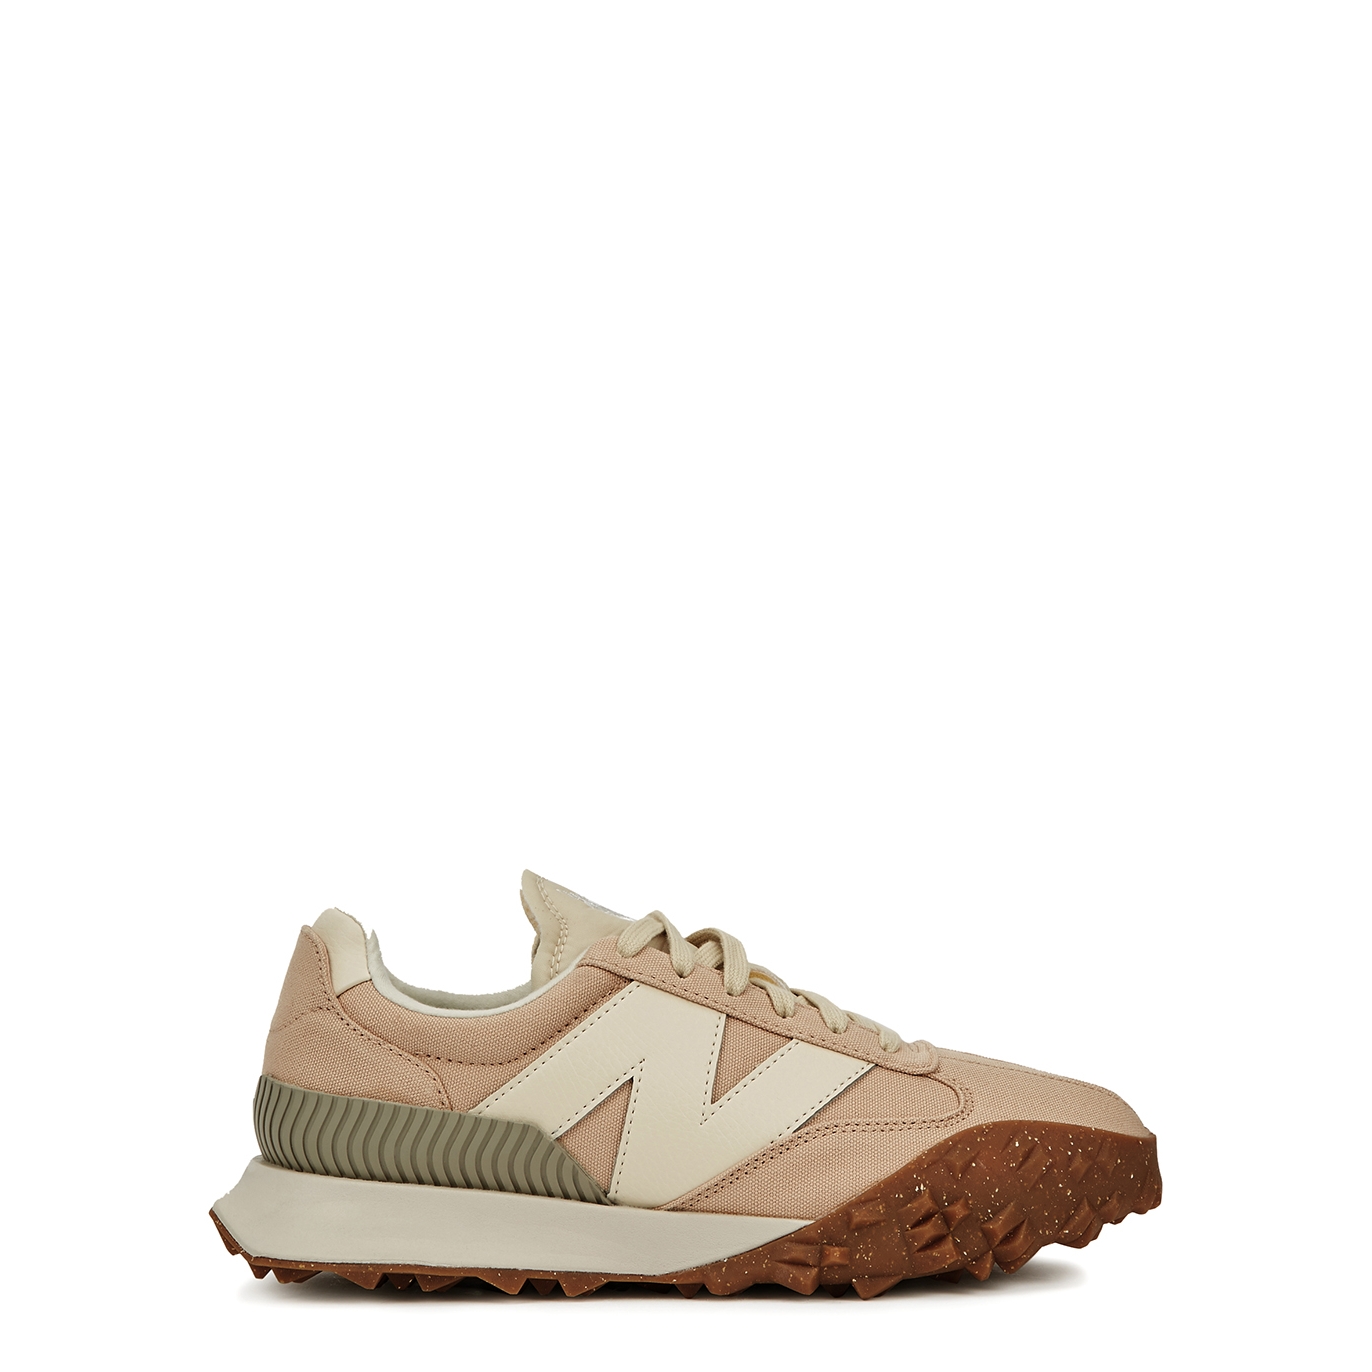 New Balance XC-72 Panelled Canvas Sneakers - Peach - 6